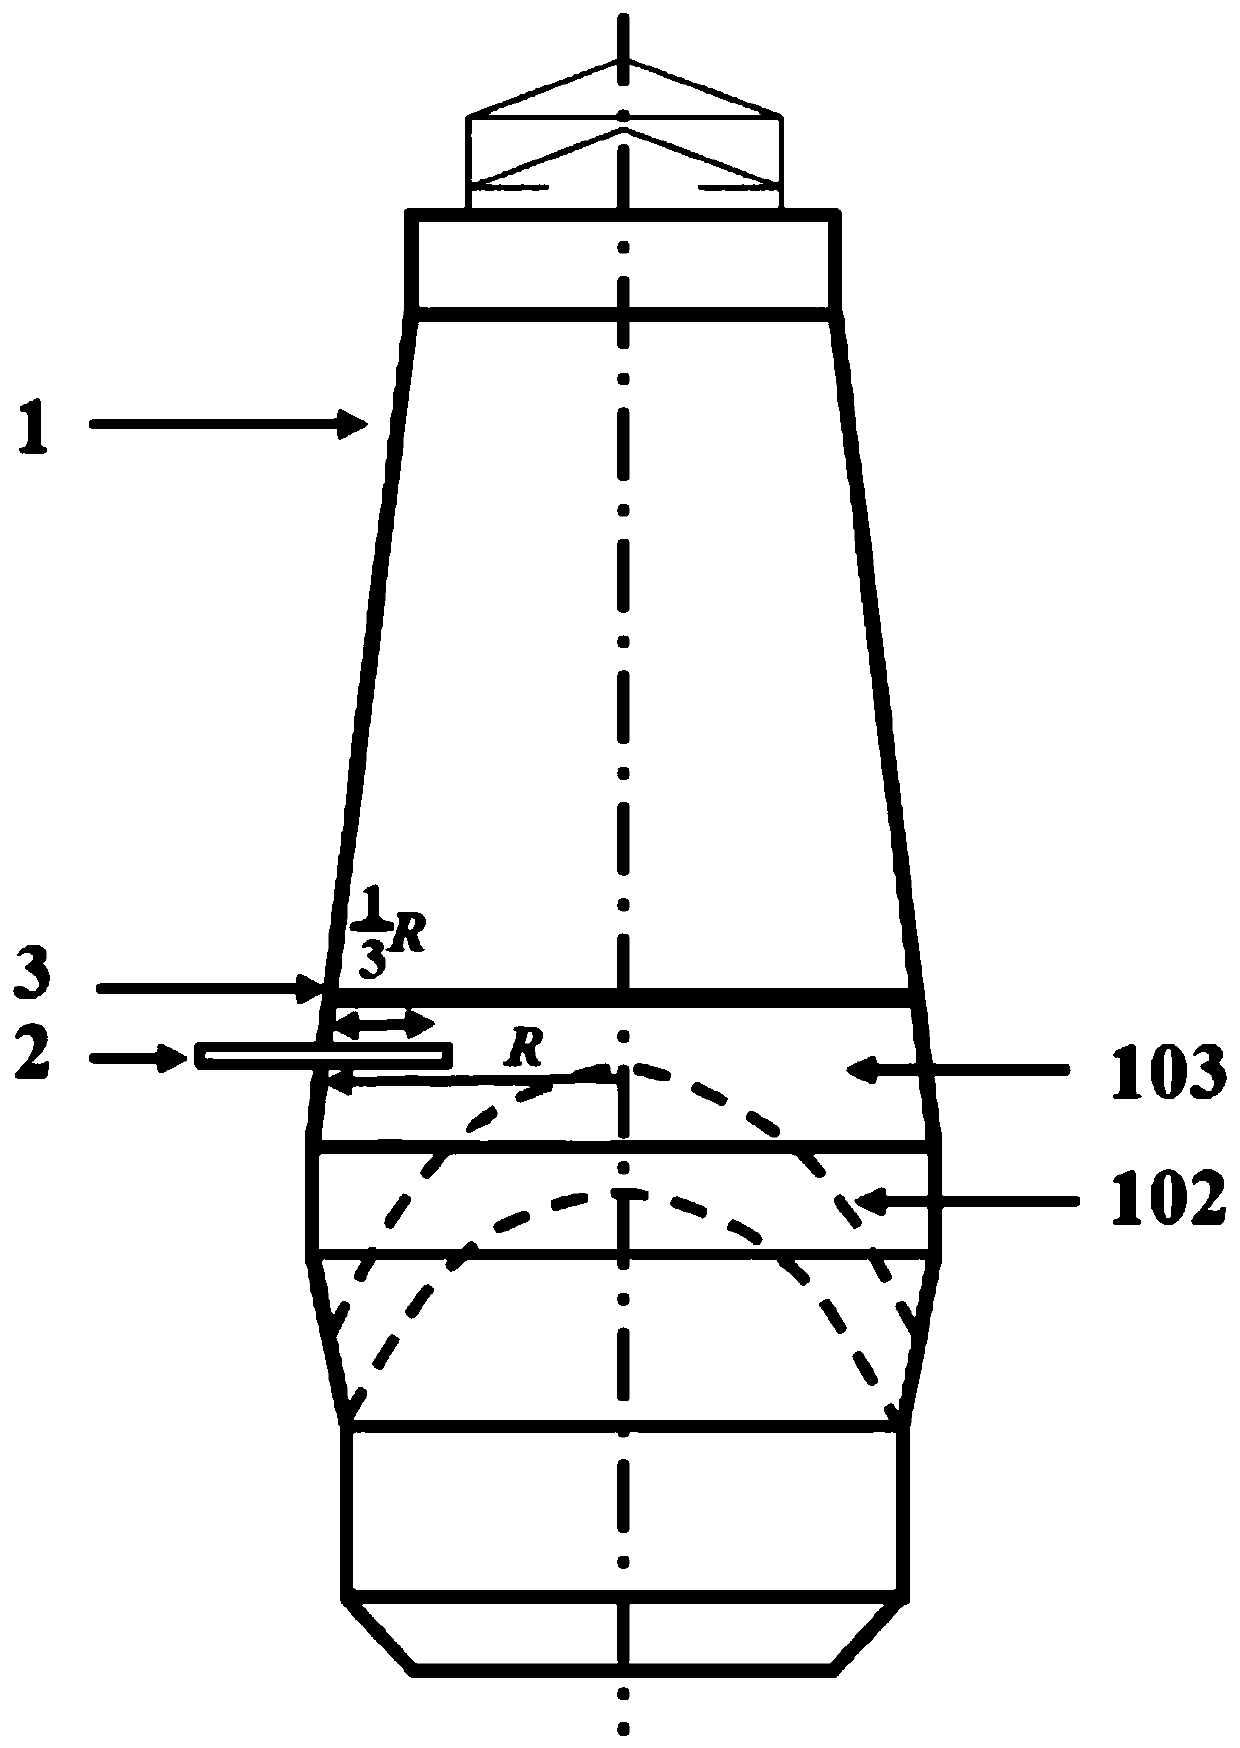 A two-stage blast furnace pulverized coal injection device